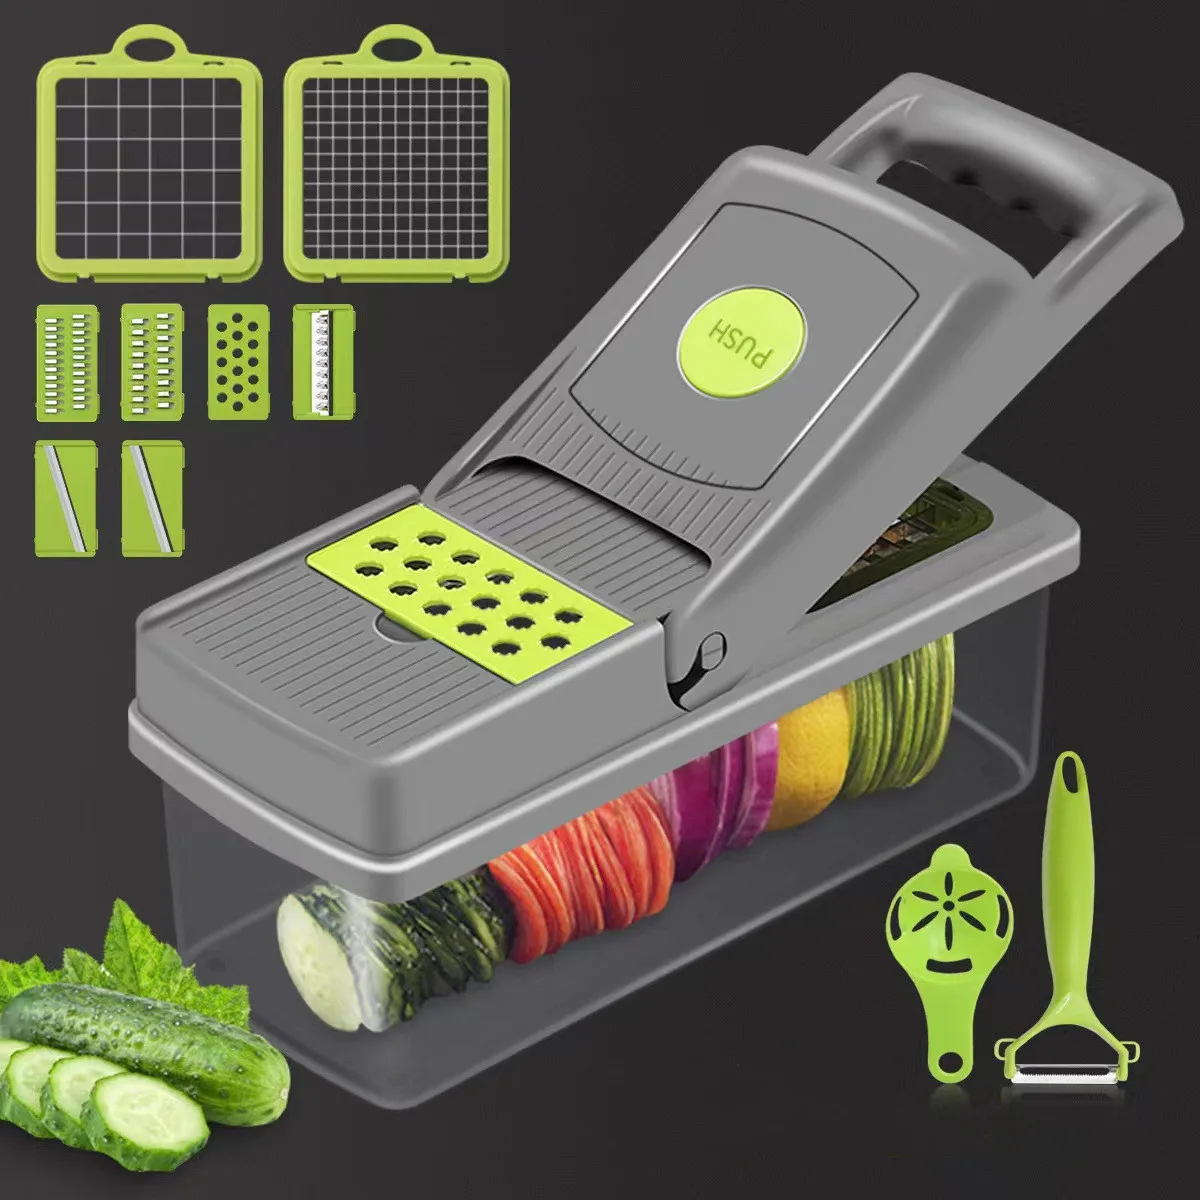 https://ae01.alicdn.com/kf/S8c4c56e7fa0644c8a5d61868617220cfR/Vegetable-Chopper-Multifunctional-Food-Chopper-Onion-Chopper-Kitchen-Vegetable-Slicer-Dicer-Cutter-Chopper-With-Container.jpg